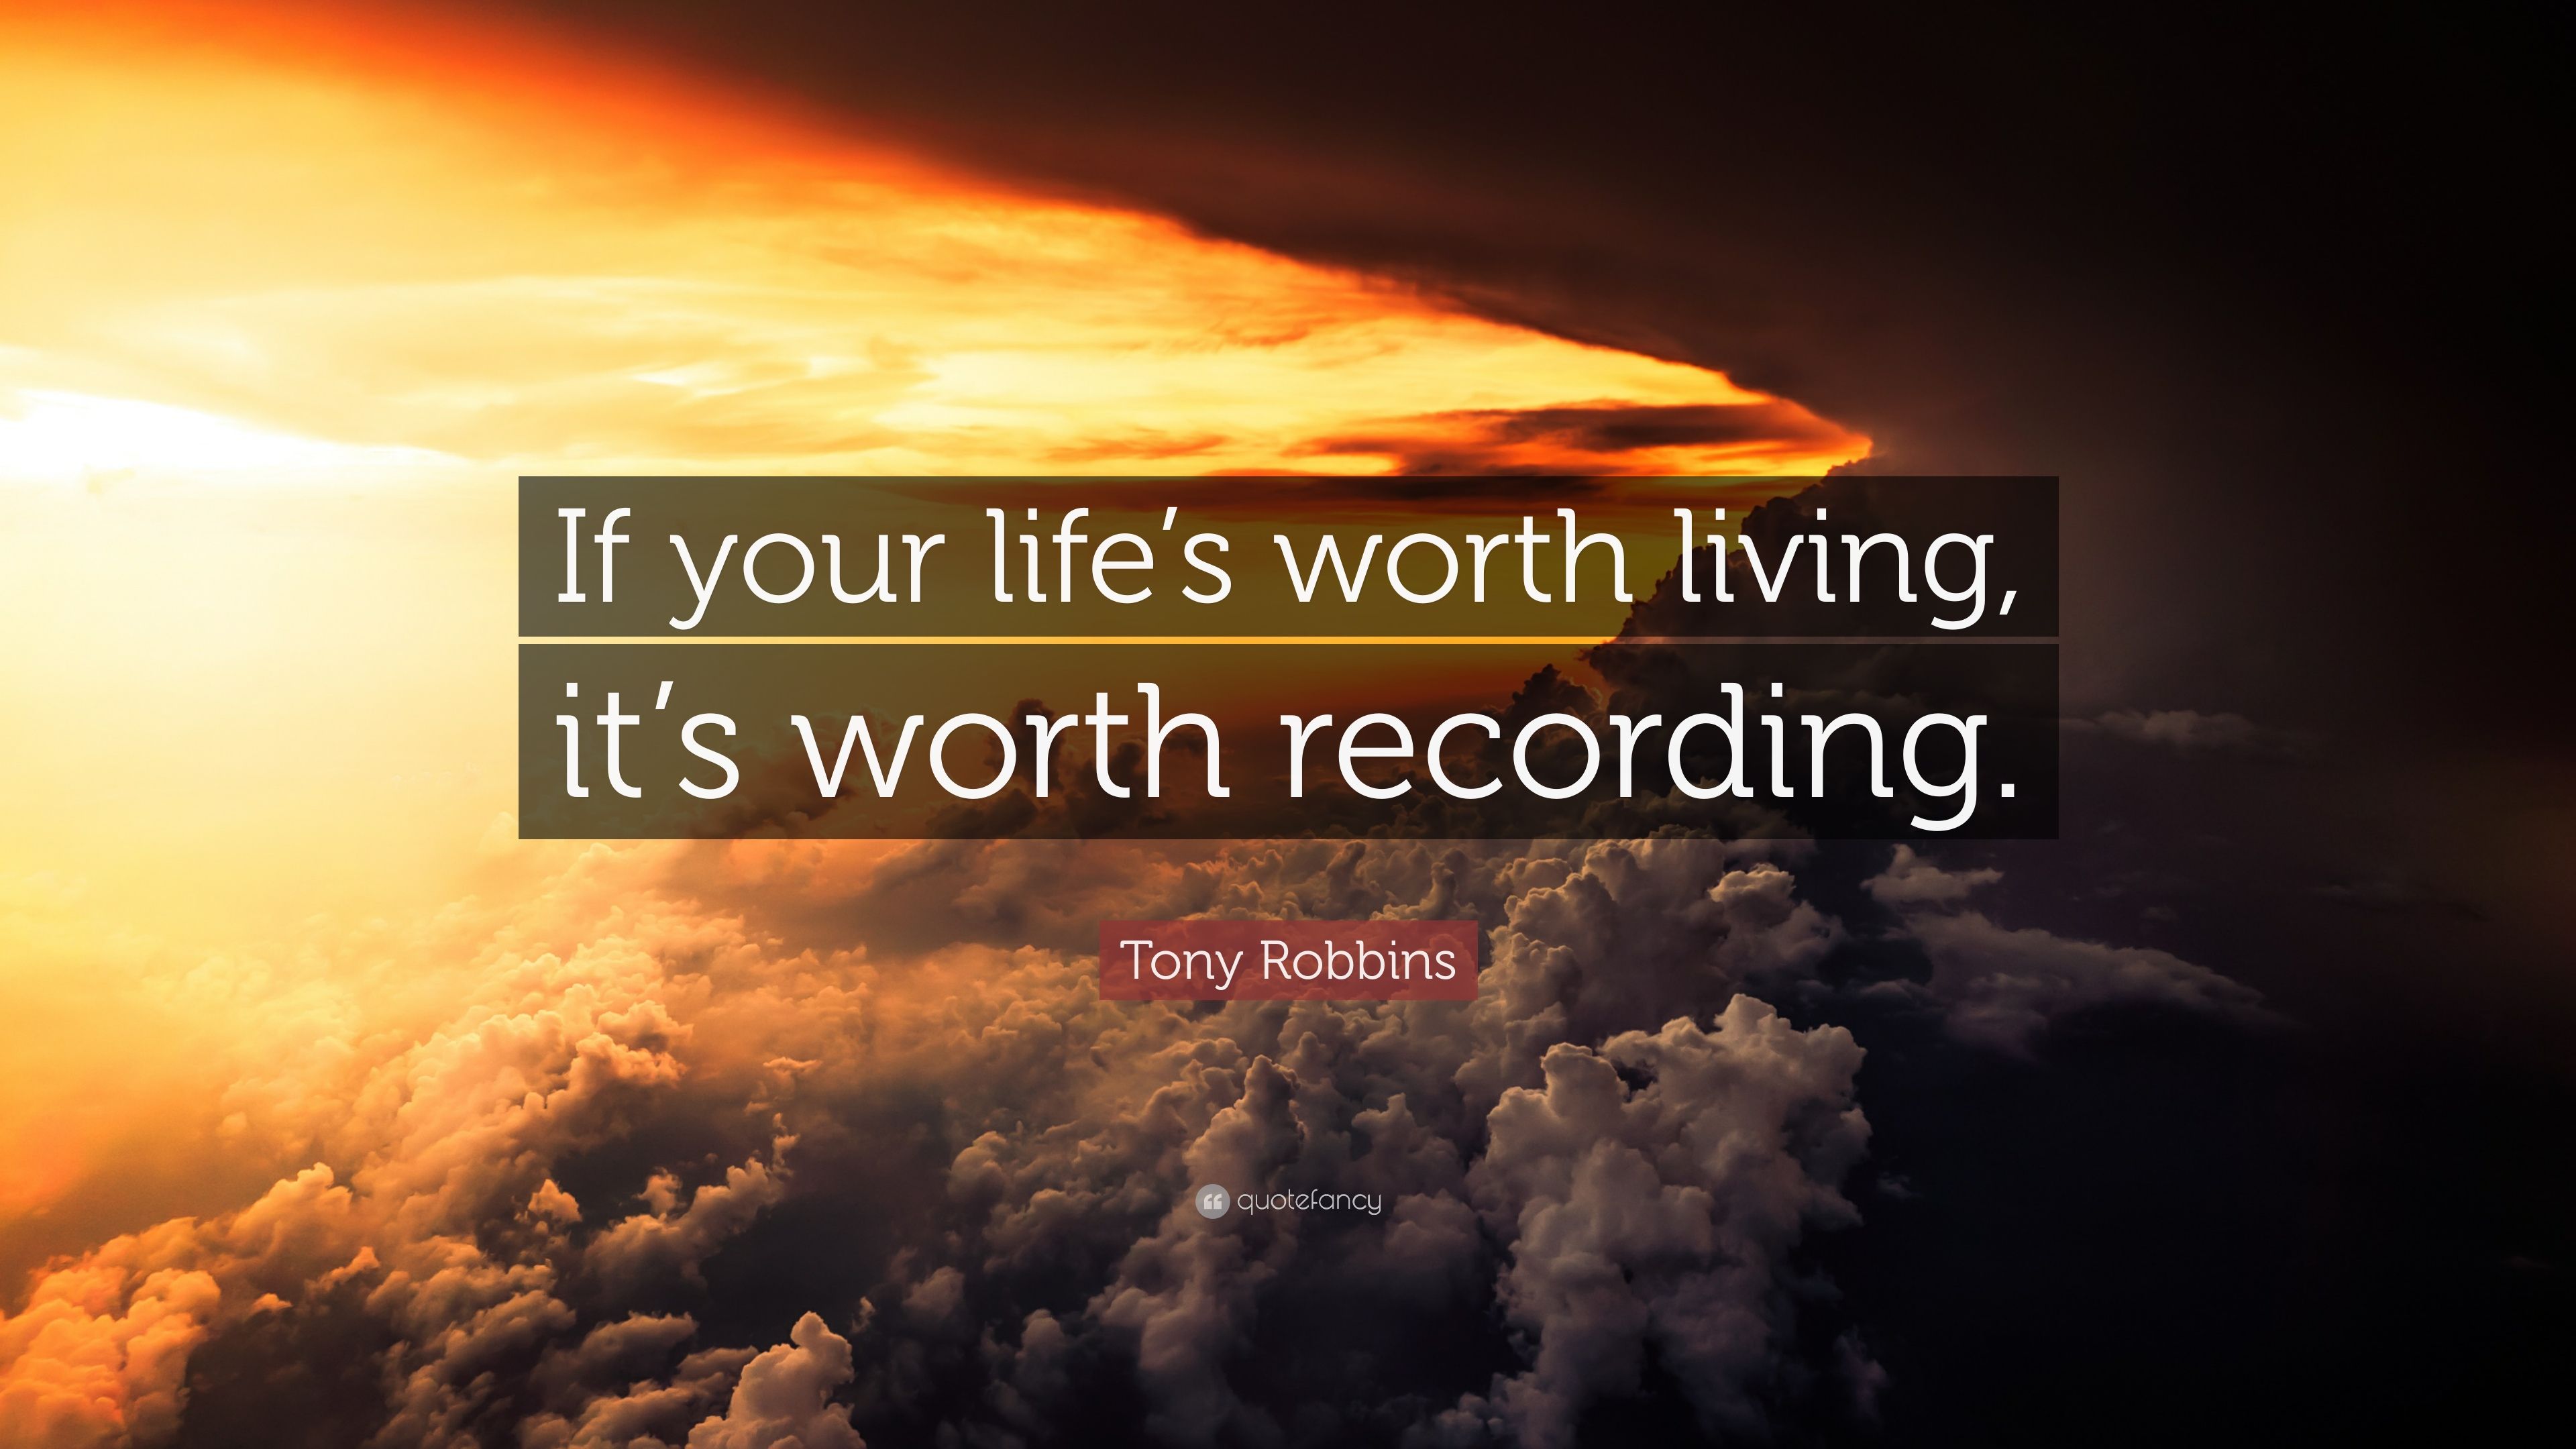 Tony Robbins Quote: "If your life's worth living, it's worth...